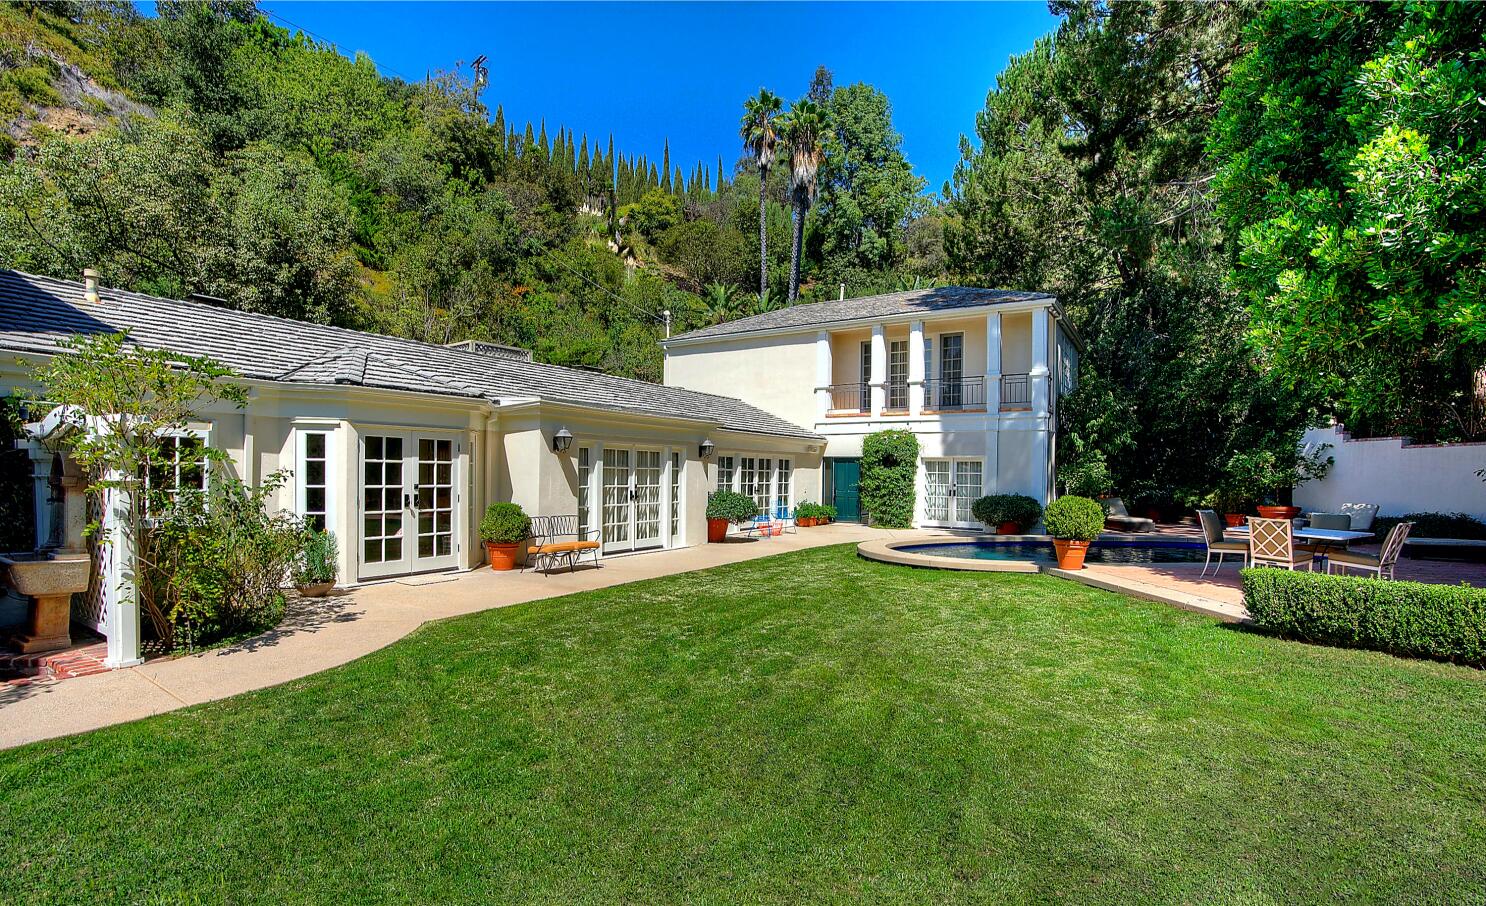 Katy Perry Performed at Auction Napa Valley, Where Bidders Paid Over  $300,000 for House Tours